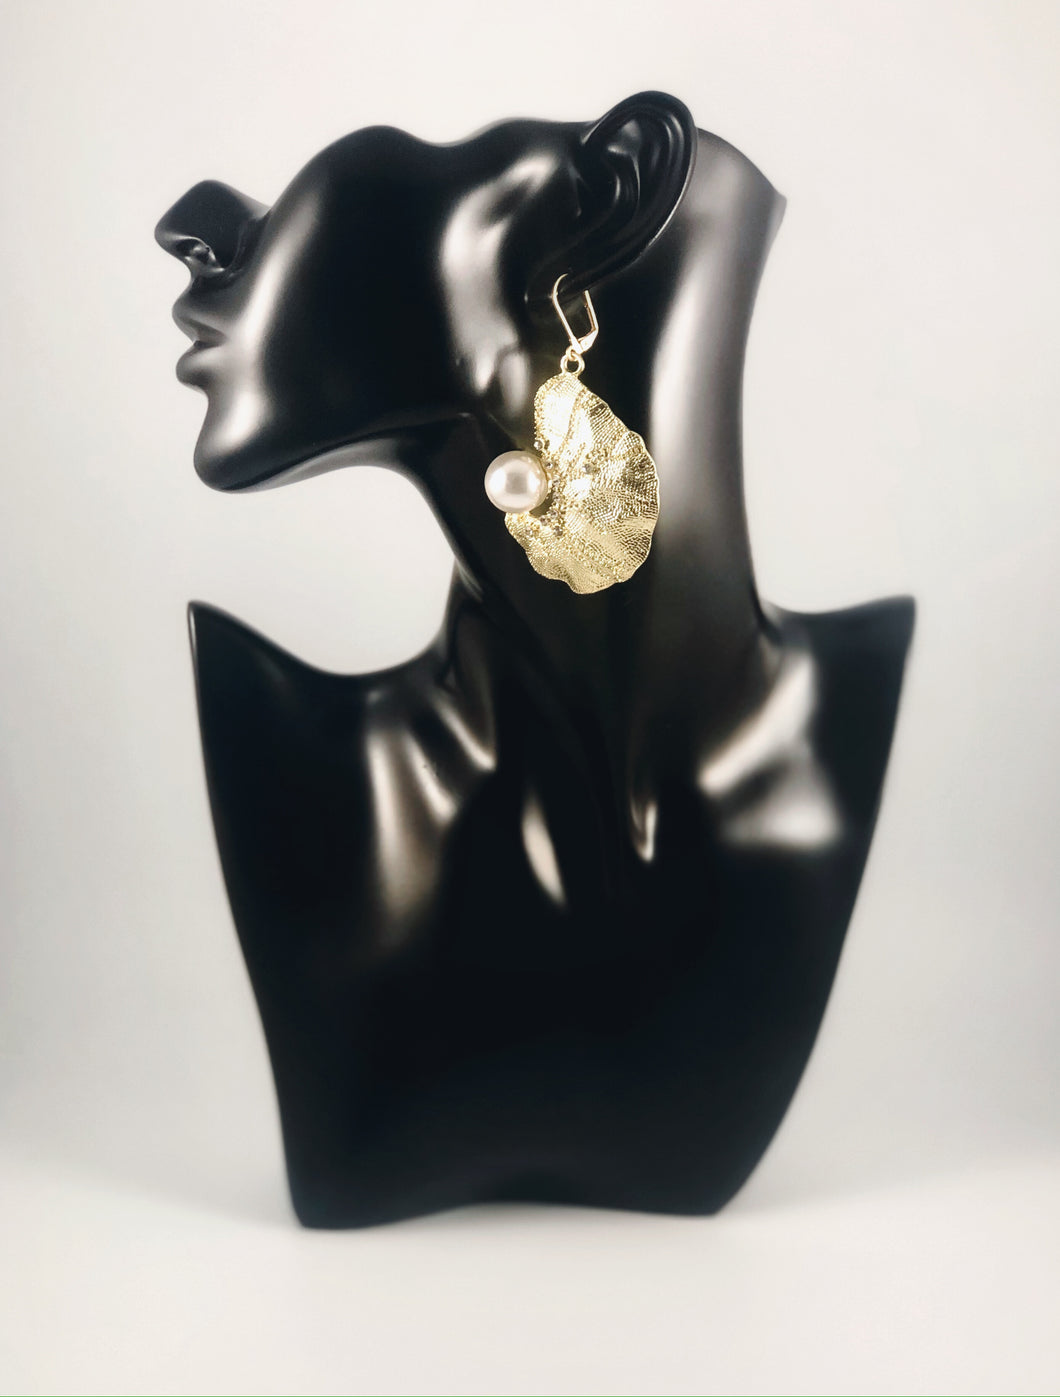 Biomorphic Gold Pearl with Rhinestone Details Dangle Earrings Color: Light Gold/White Approx. 2.5